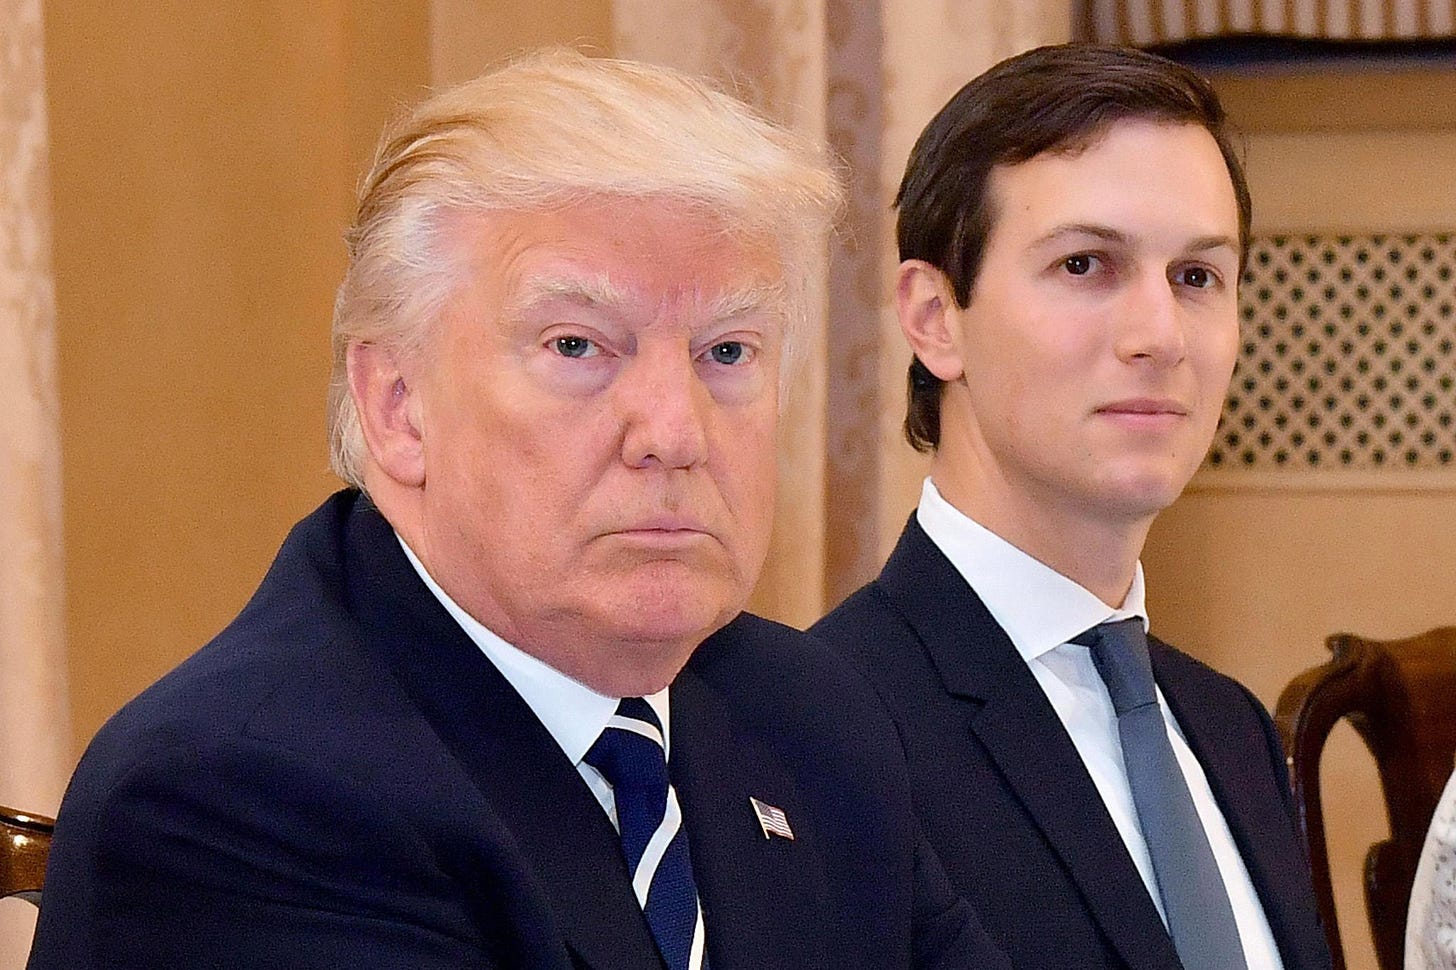 New drama for Jared Kushner, in a family familiar with controversy - nj.com